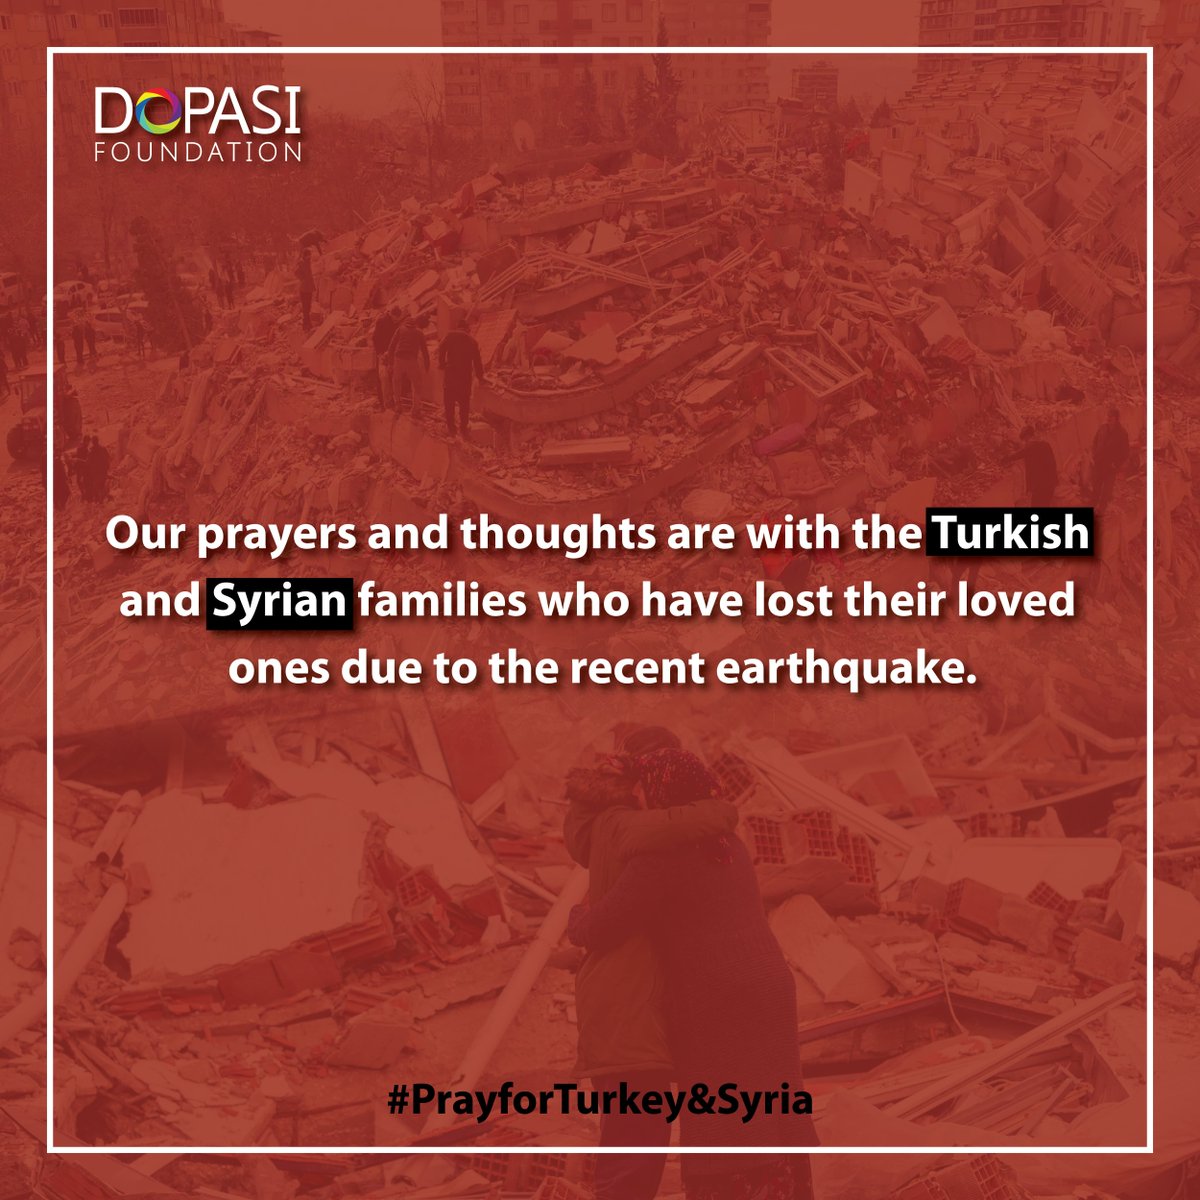 Our prayers are with the Turkish and Syrian families! 

#EarthquakeinTurkey #Syria #Unity #BuildBackStronger